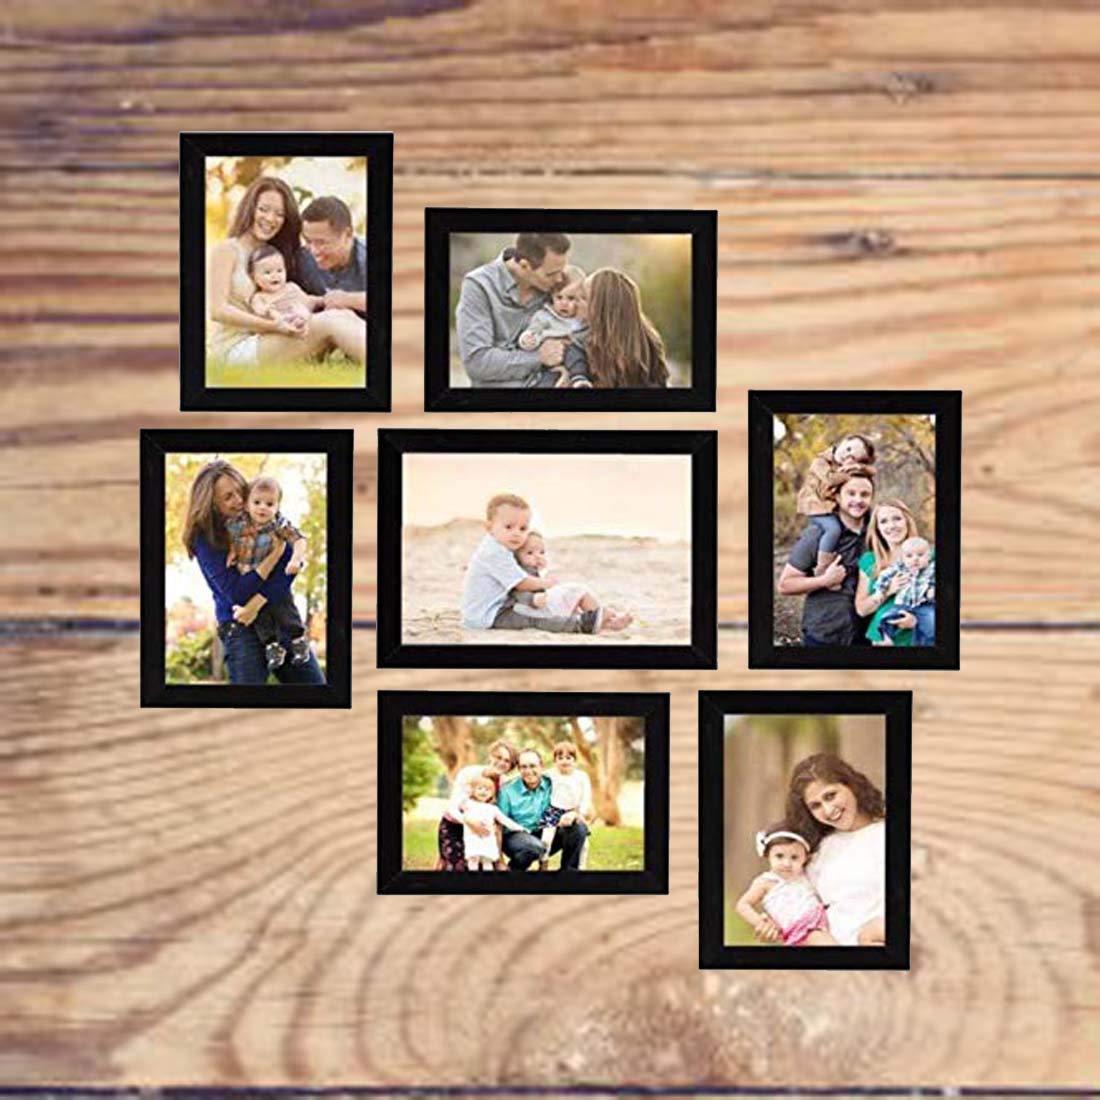 Amazon Festival Sale: Give your home a new look this Diwali by getting these trending photo frames